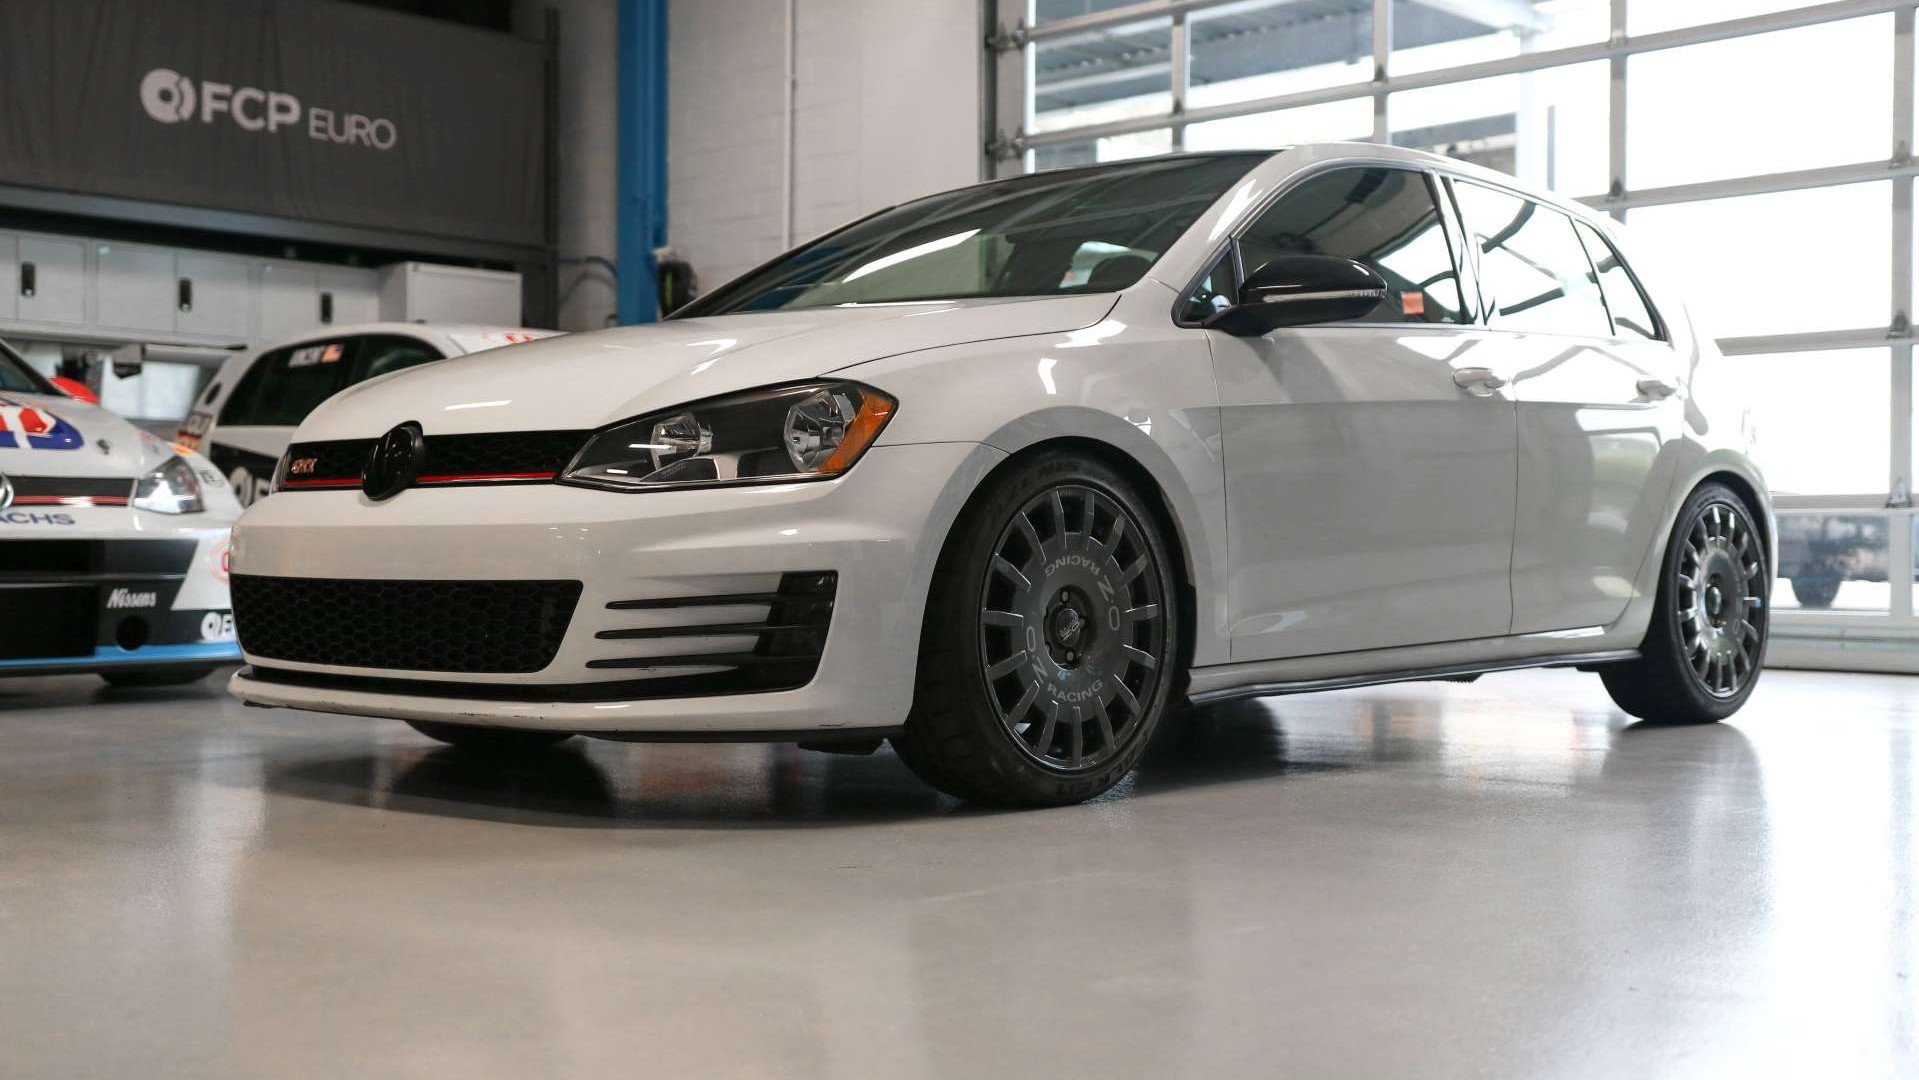 The Best VW Mk7 GTI Mods For The Street